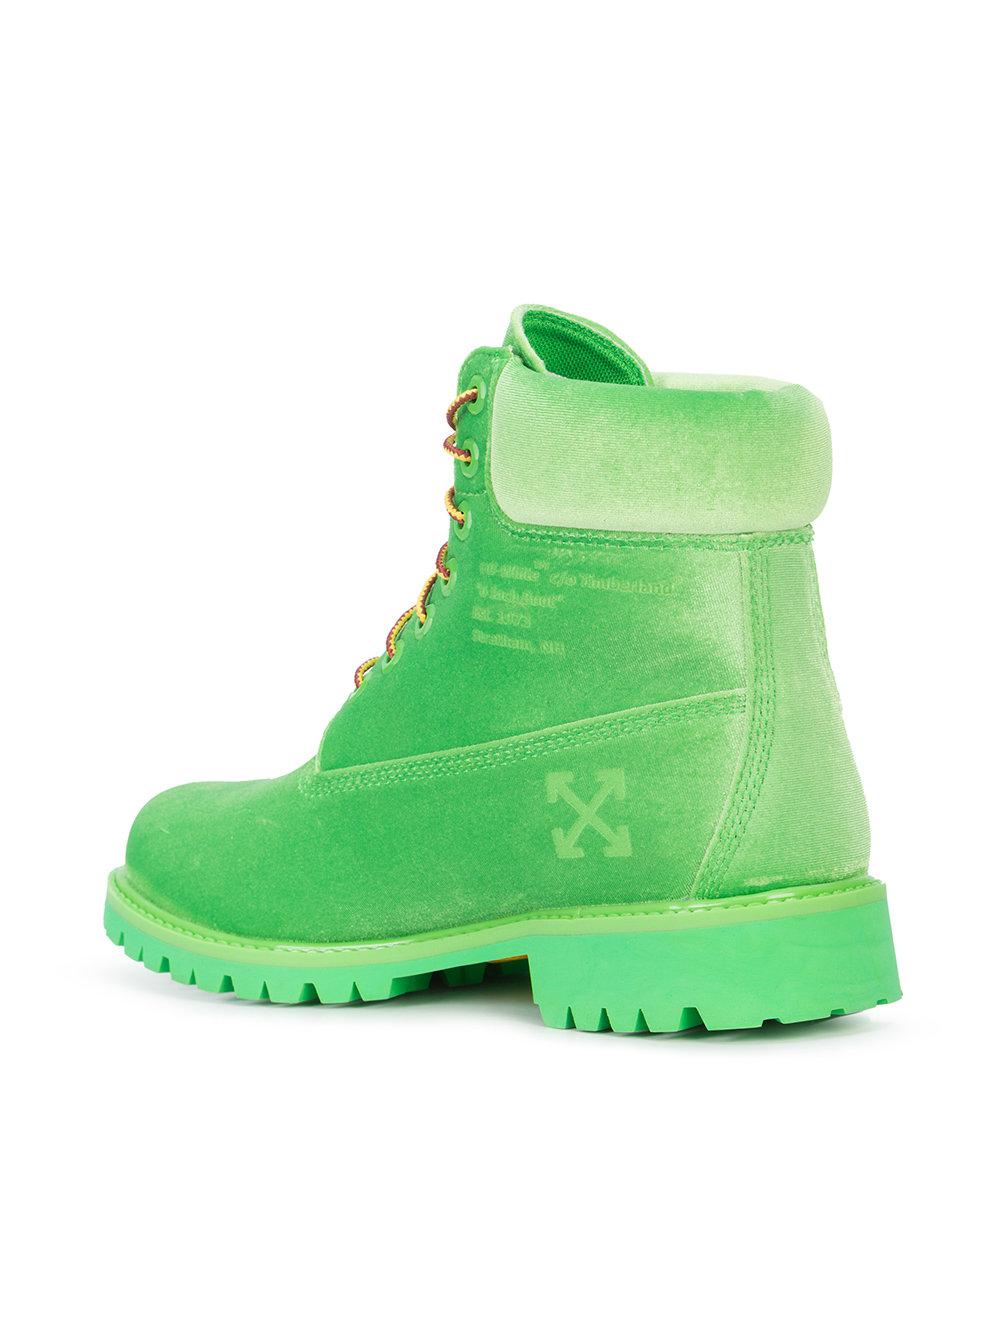 off white timbs green